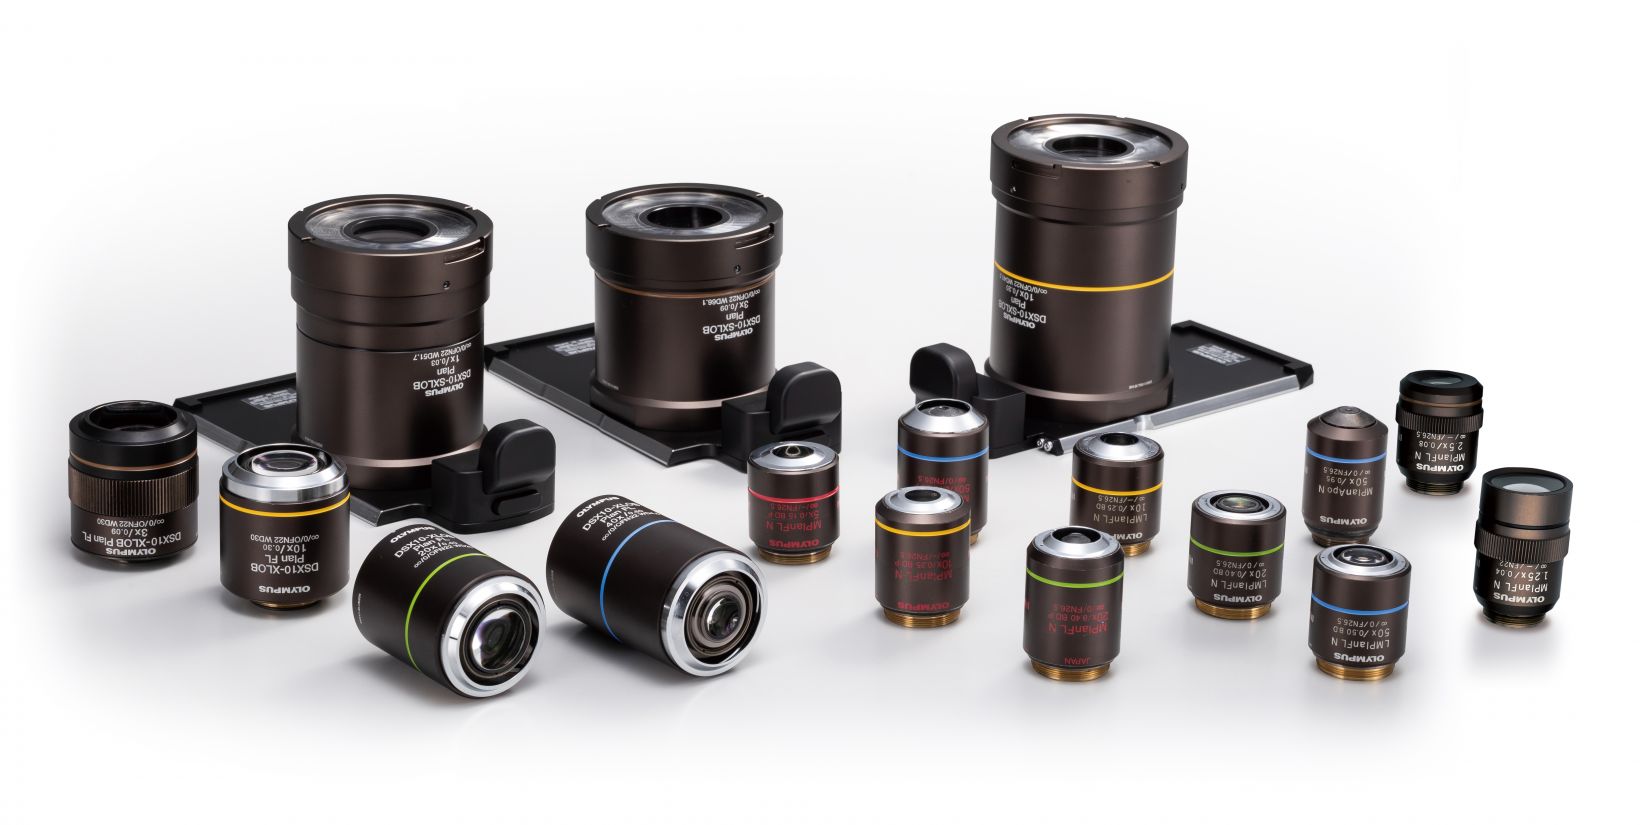 Lineup of 17 objective lenses